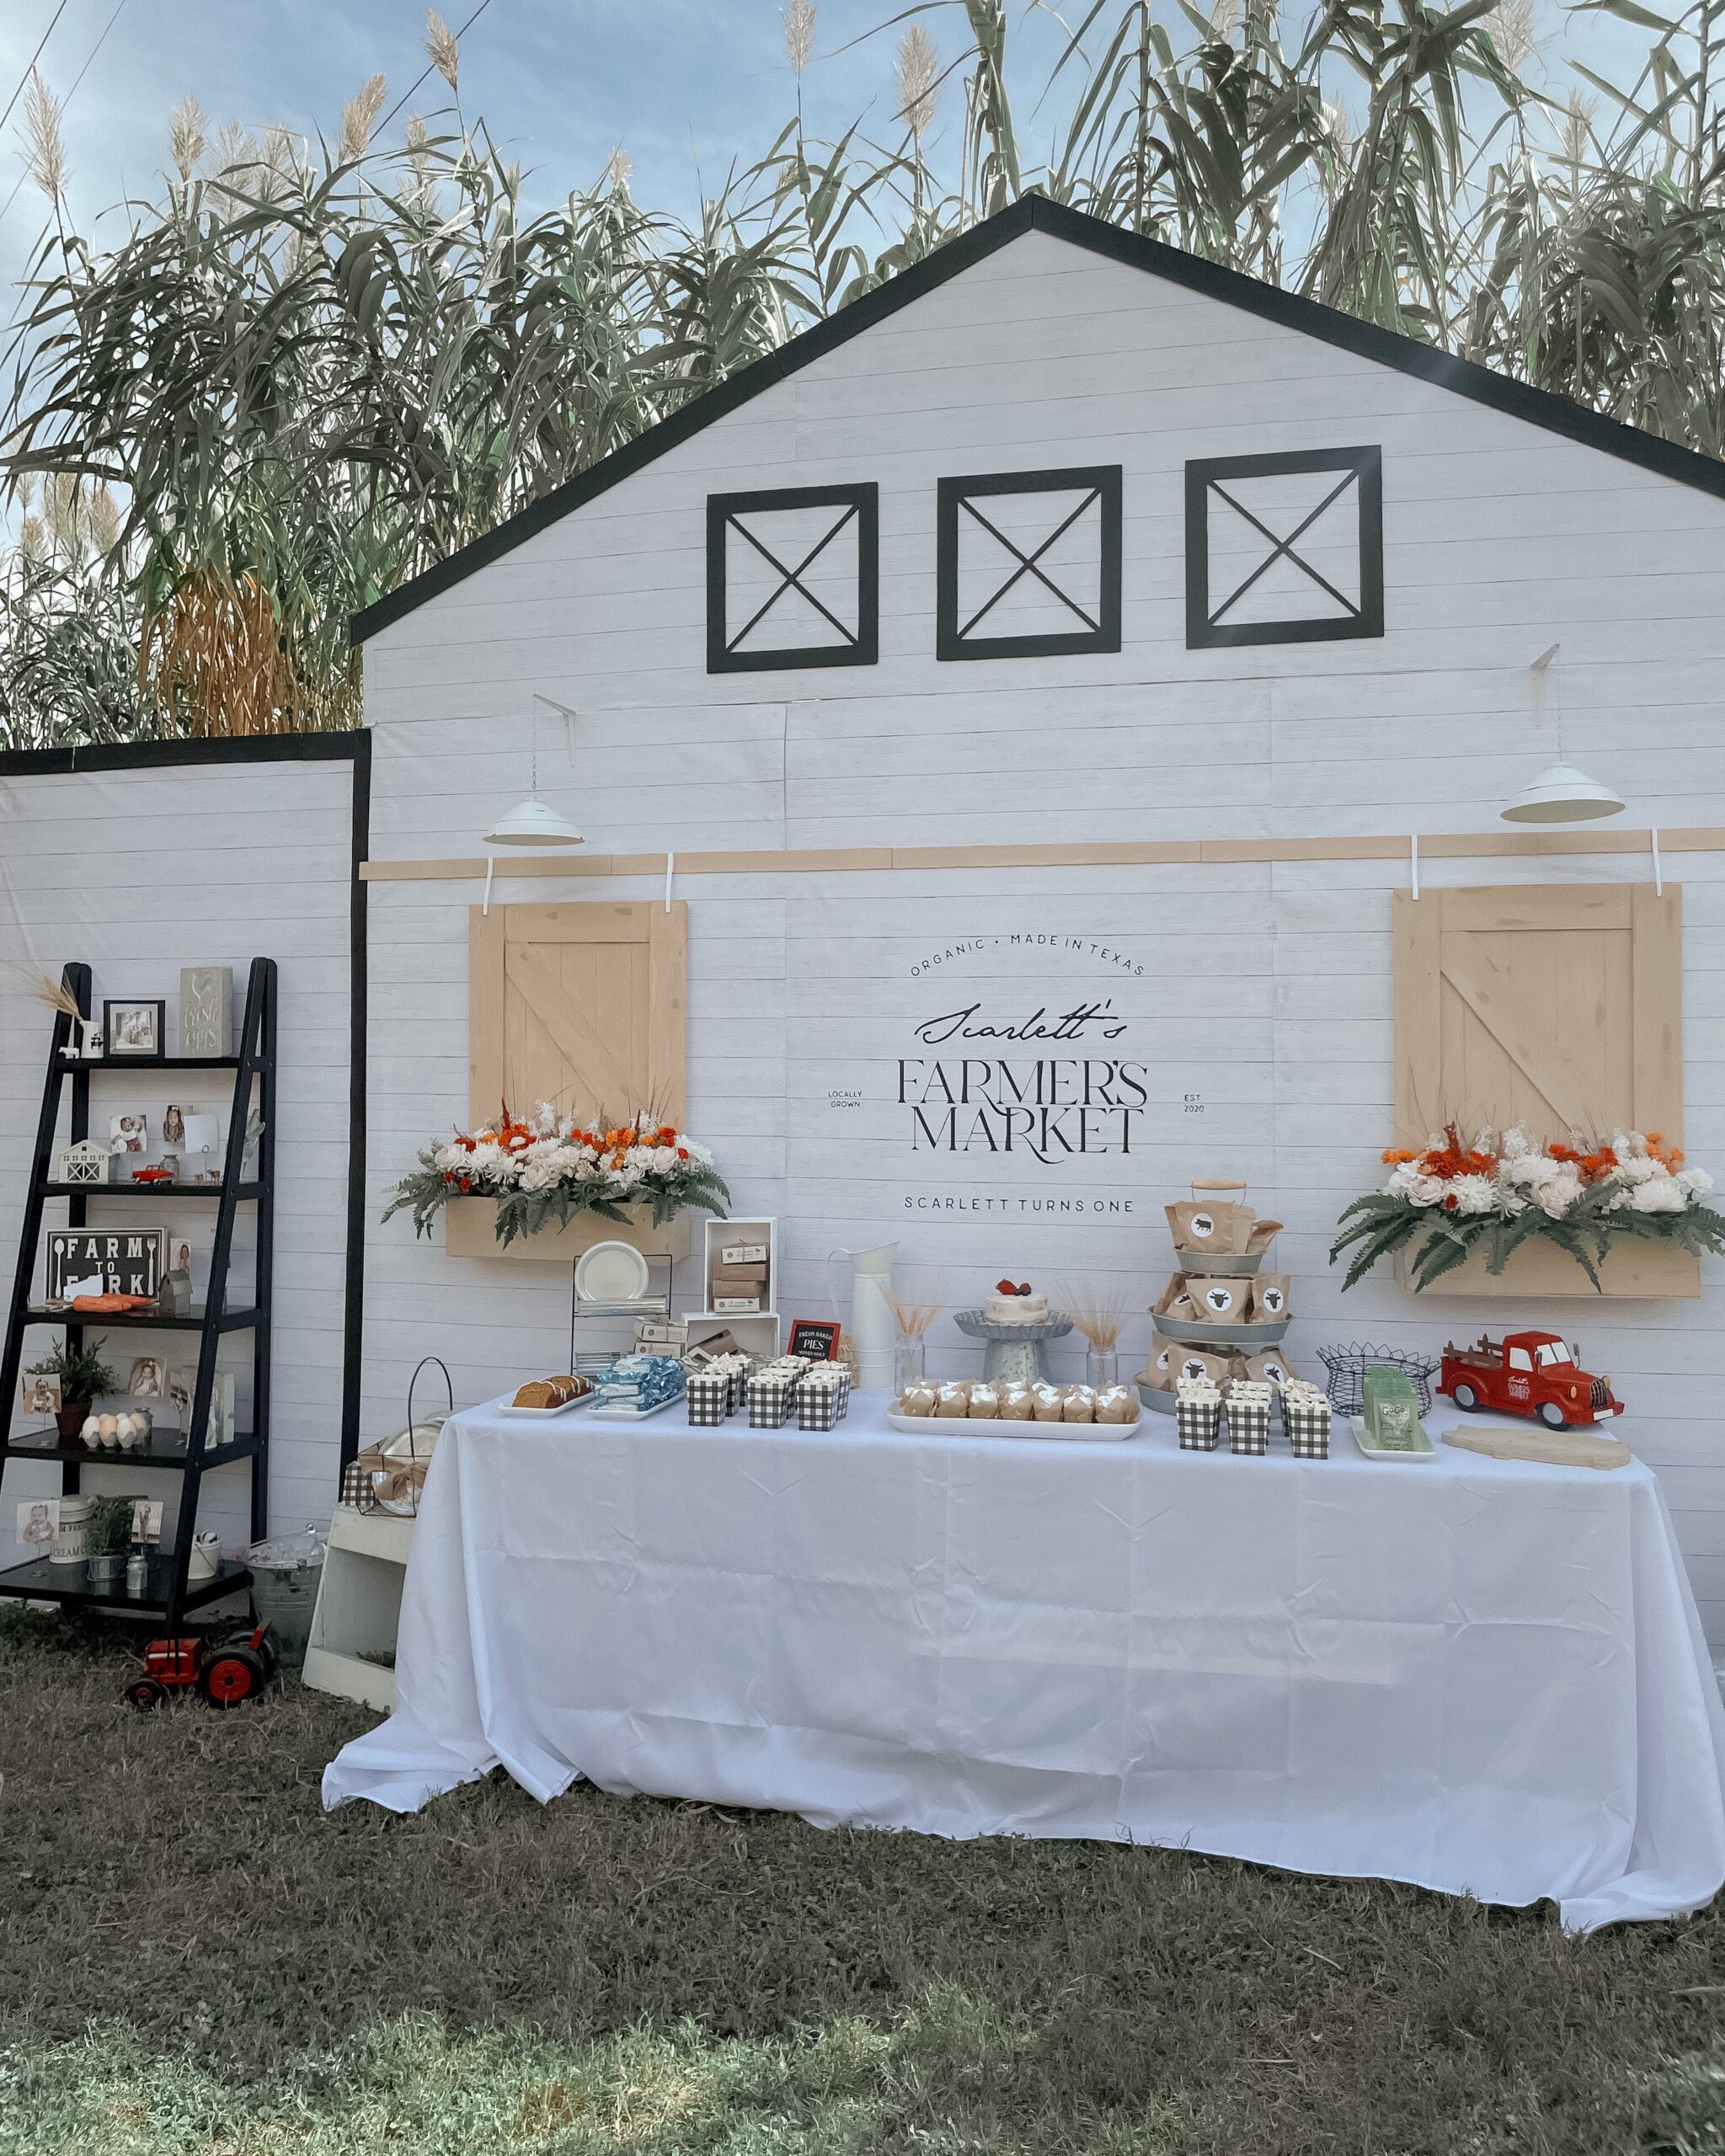 Food table backdrop of a personalized Farmers Market  storefront at a farmers market first birthday